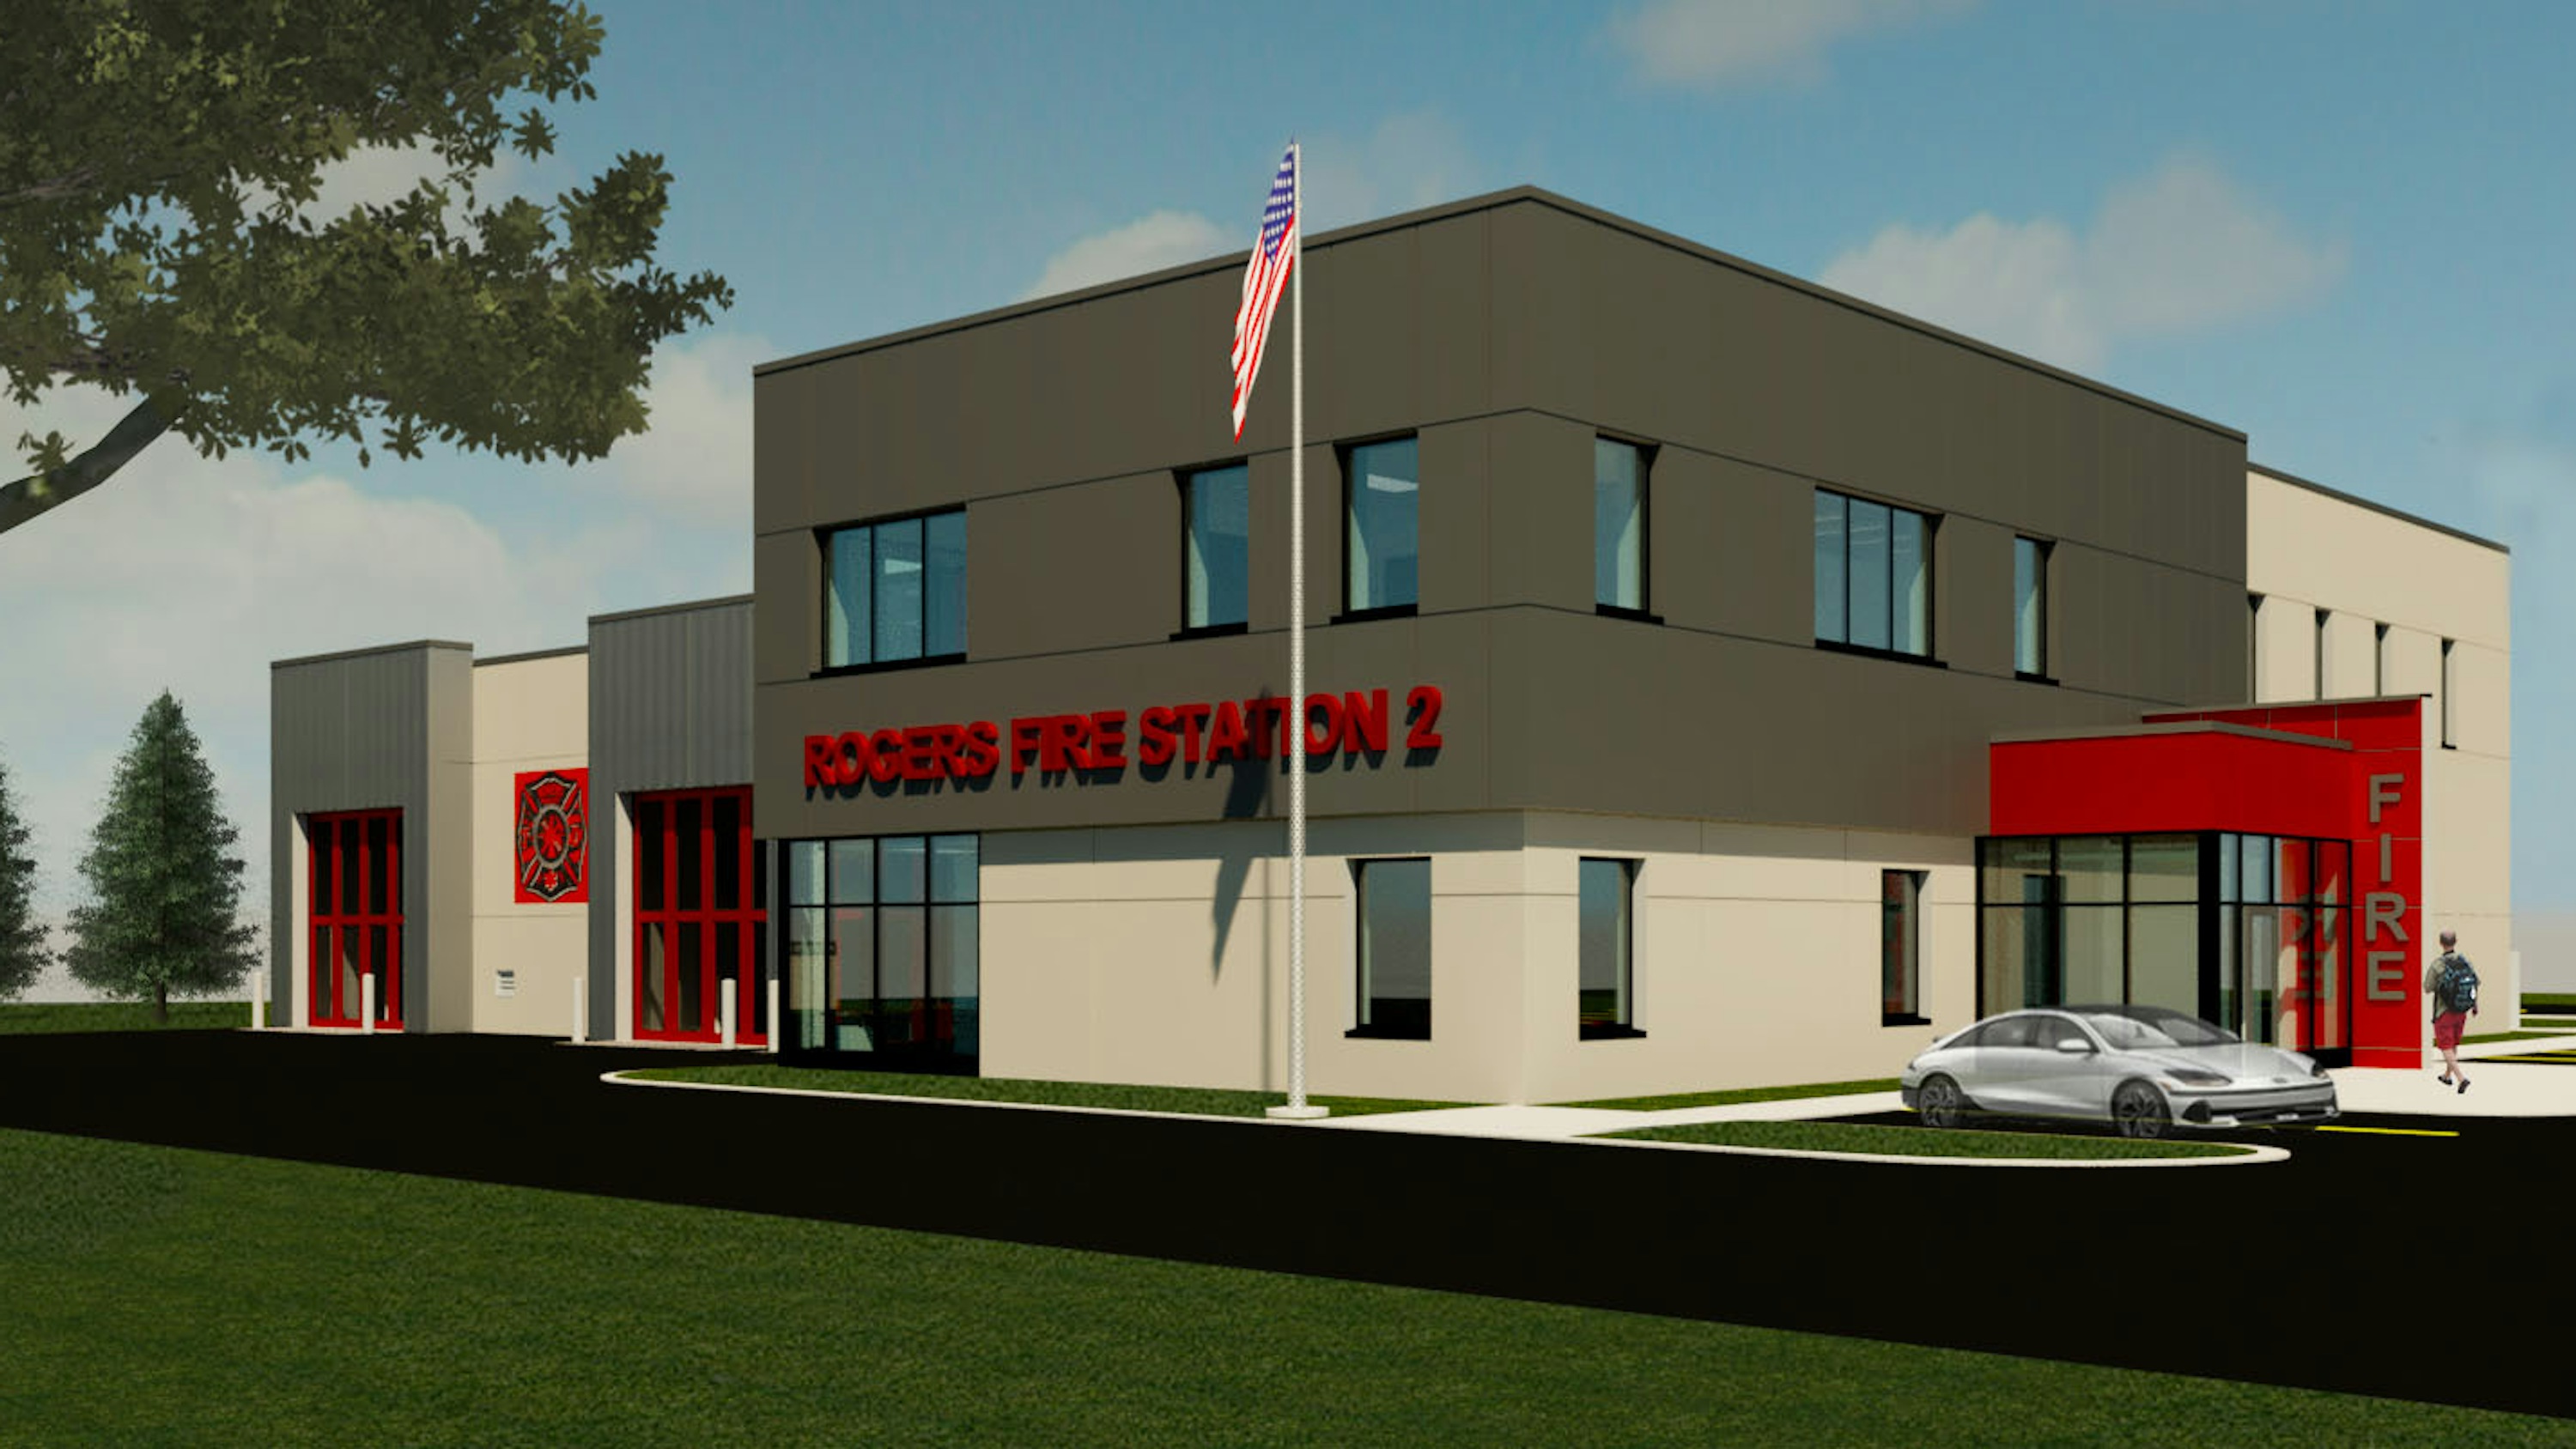 Rogers Fire Station 1